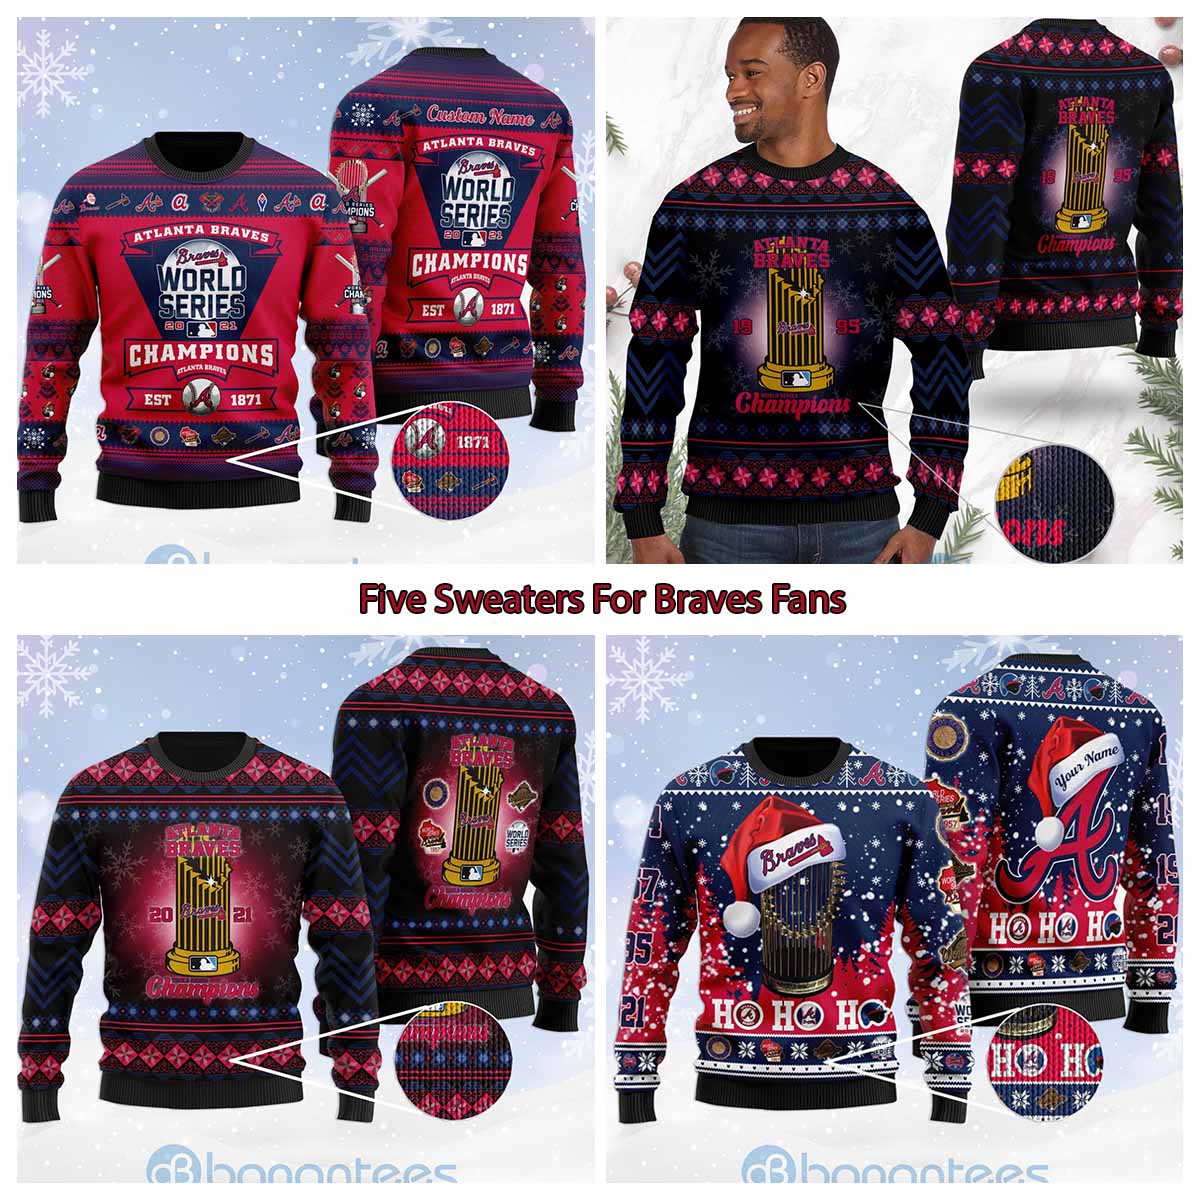 Five Sweaters For Braves Fans